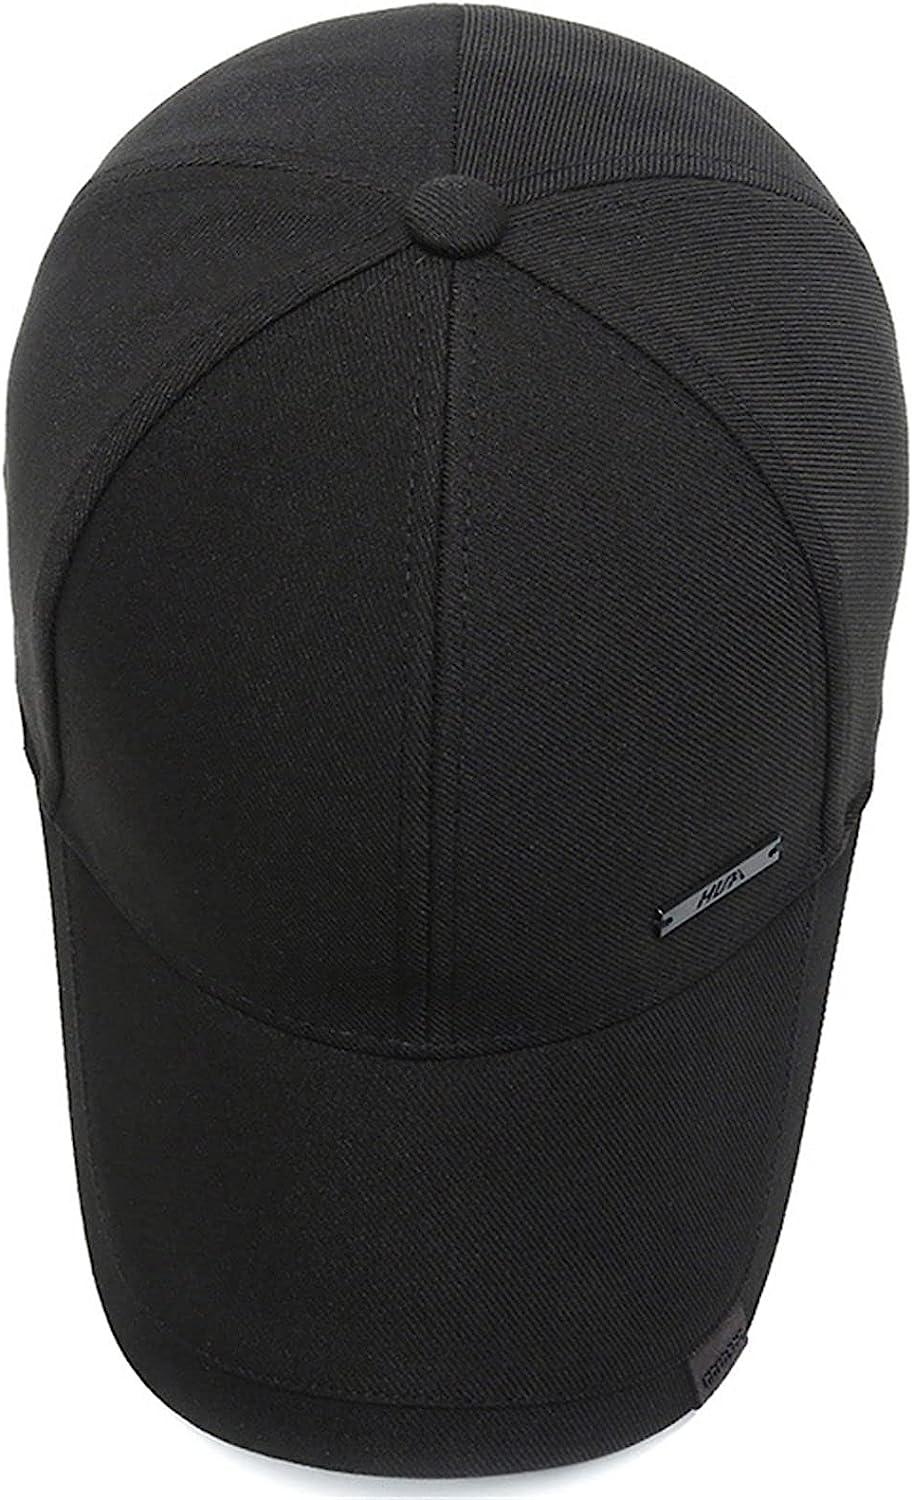 Vintage Cotton Dad Hat with Double Layer Peaks Adjustable Baseball Cap  Trendy Trucker Hat for Mens Headwear